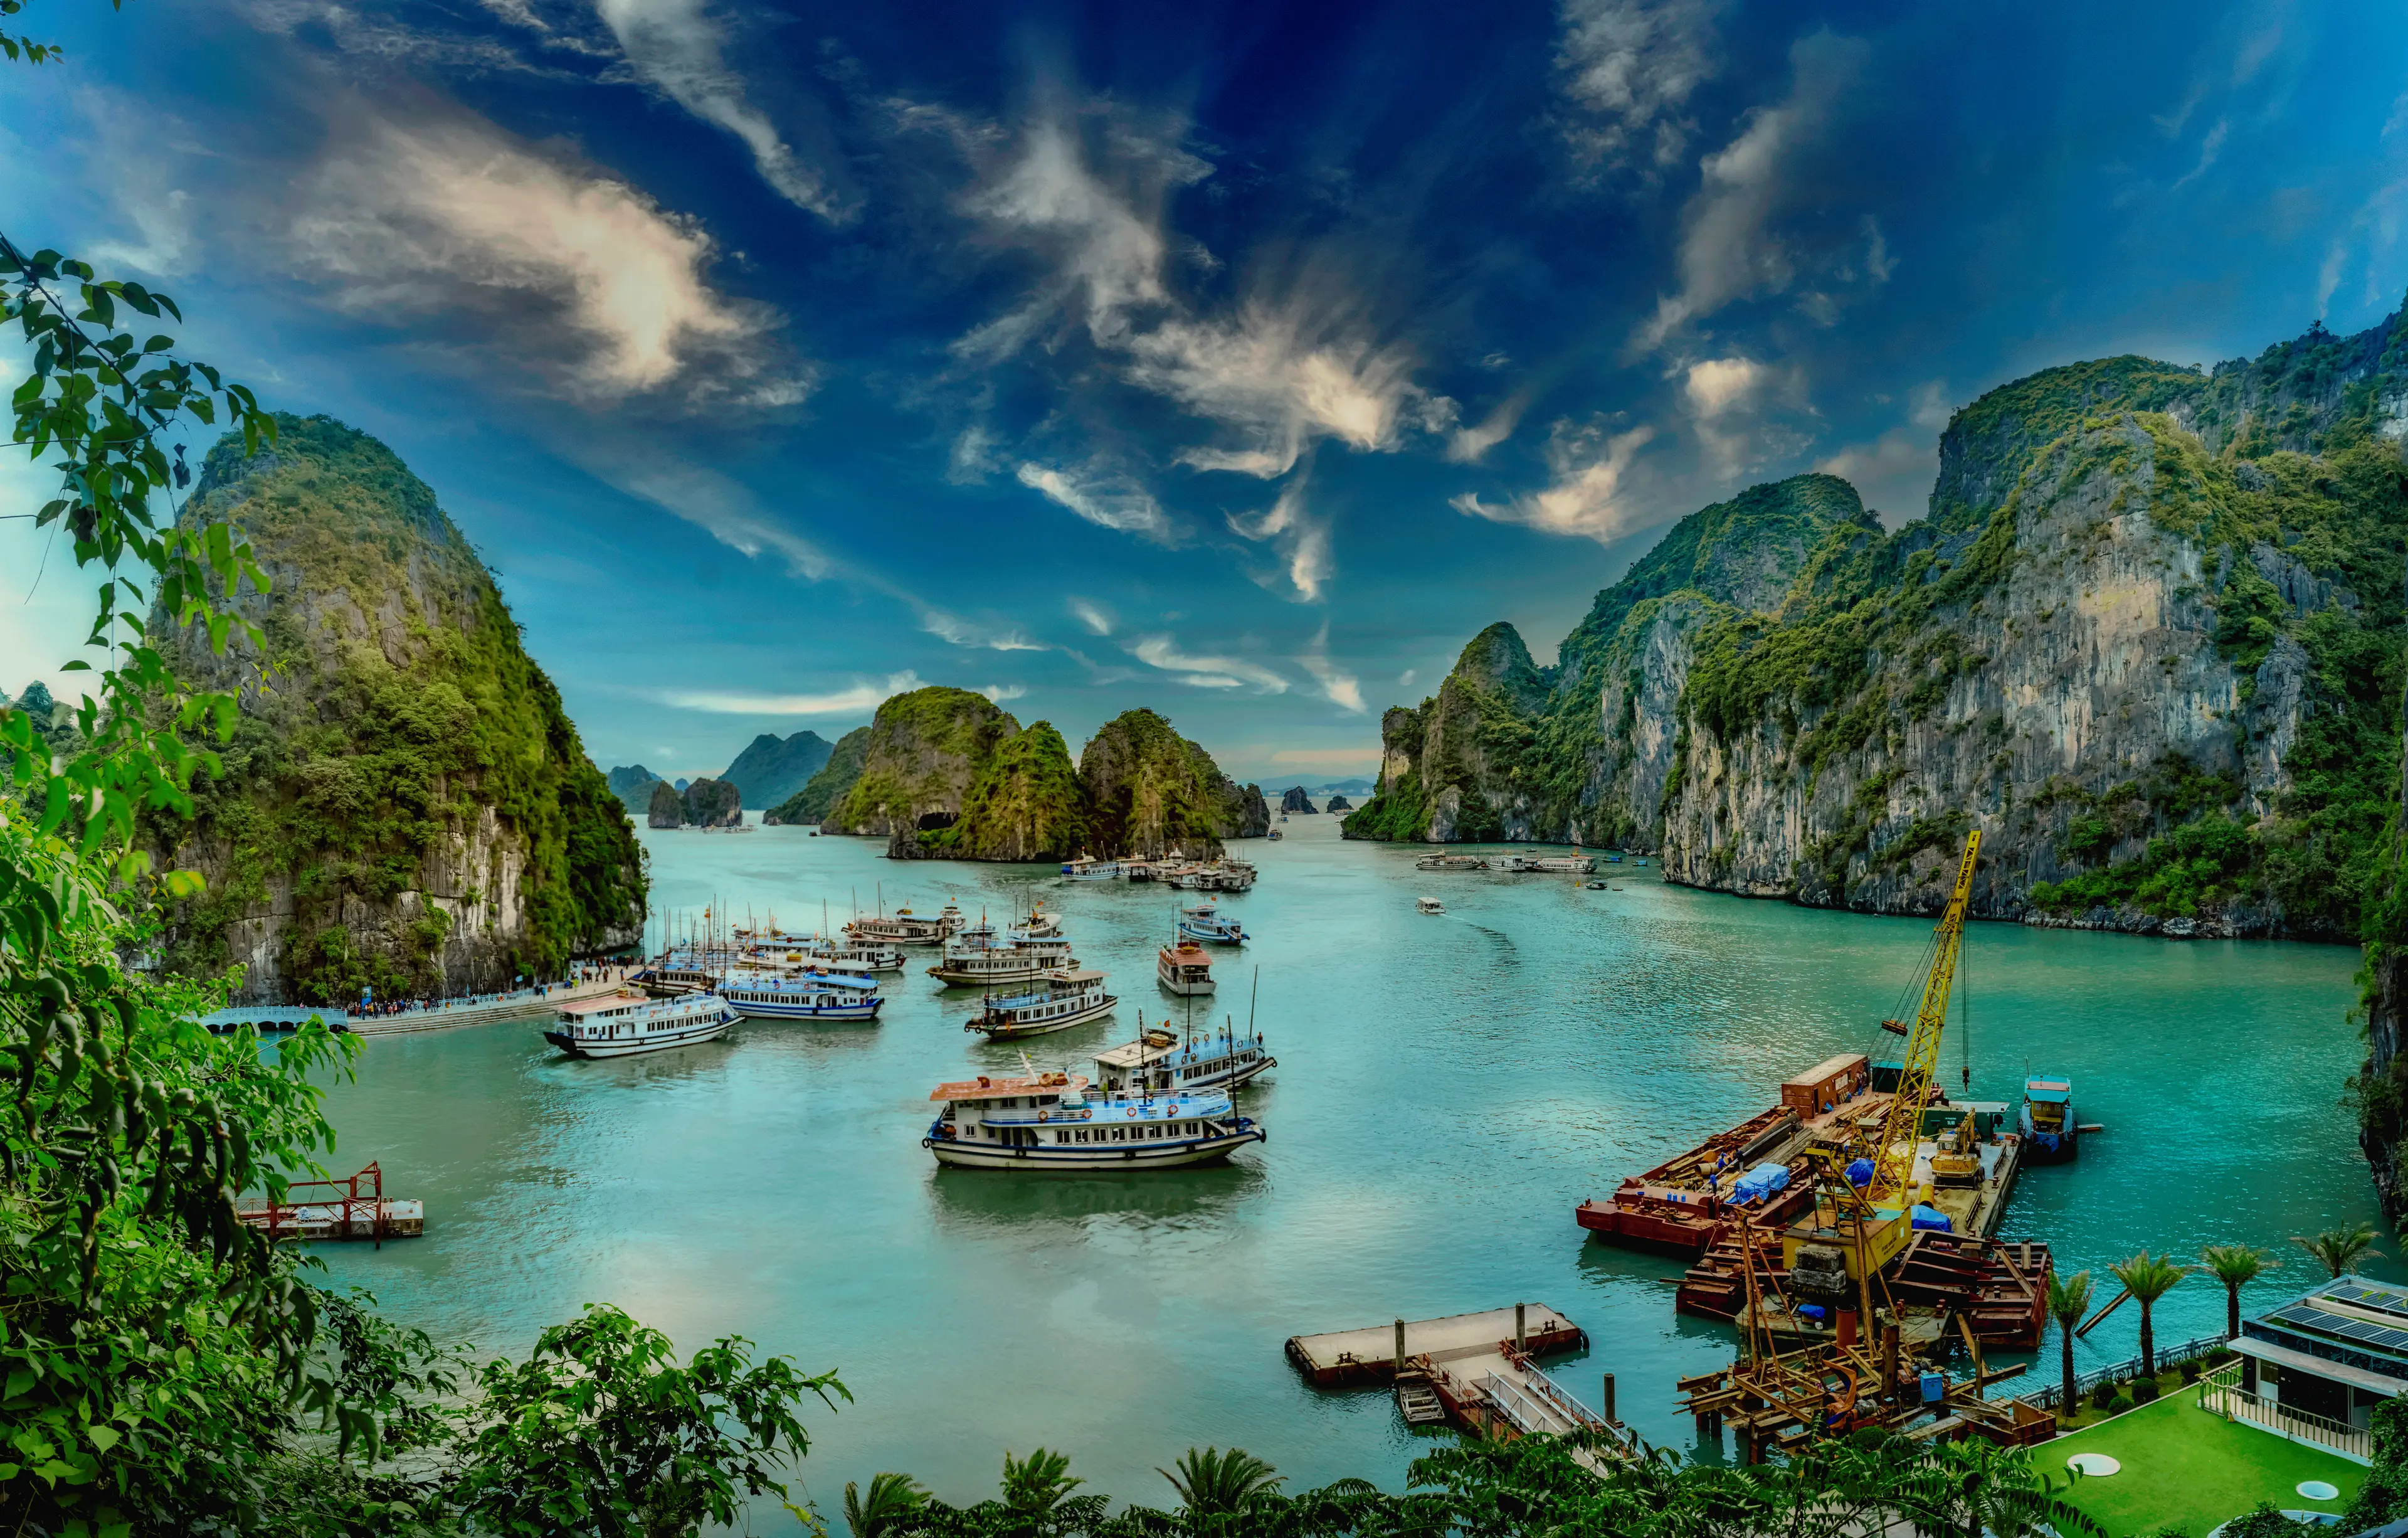 2-Day Solo Adventure in Ha Long Bay: Local Secrets, Nightlife & Outdoors